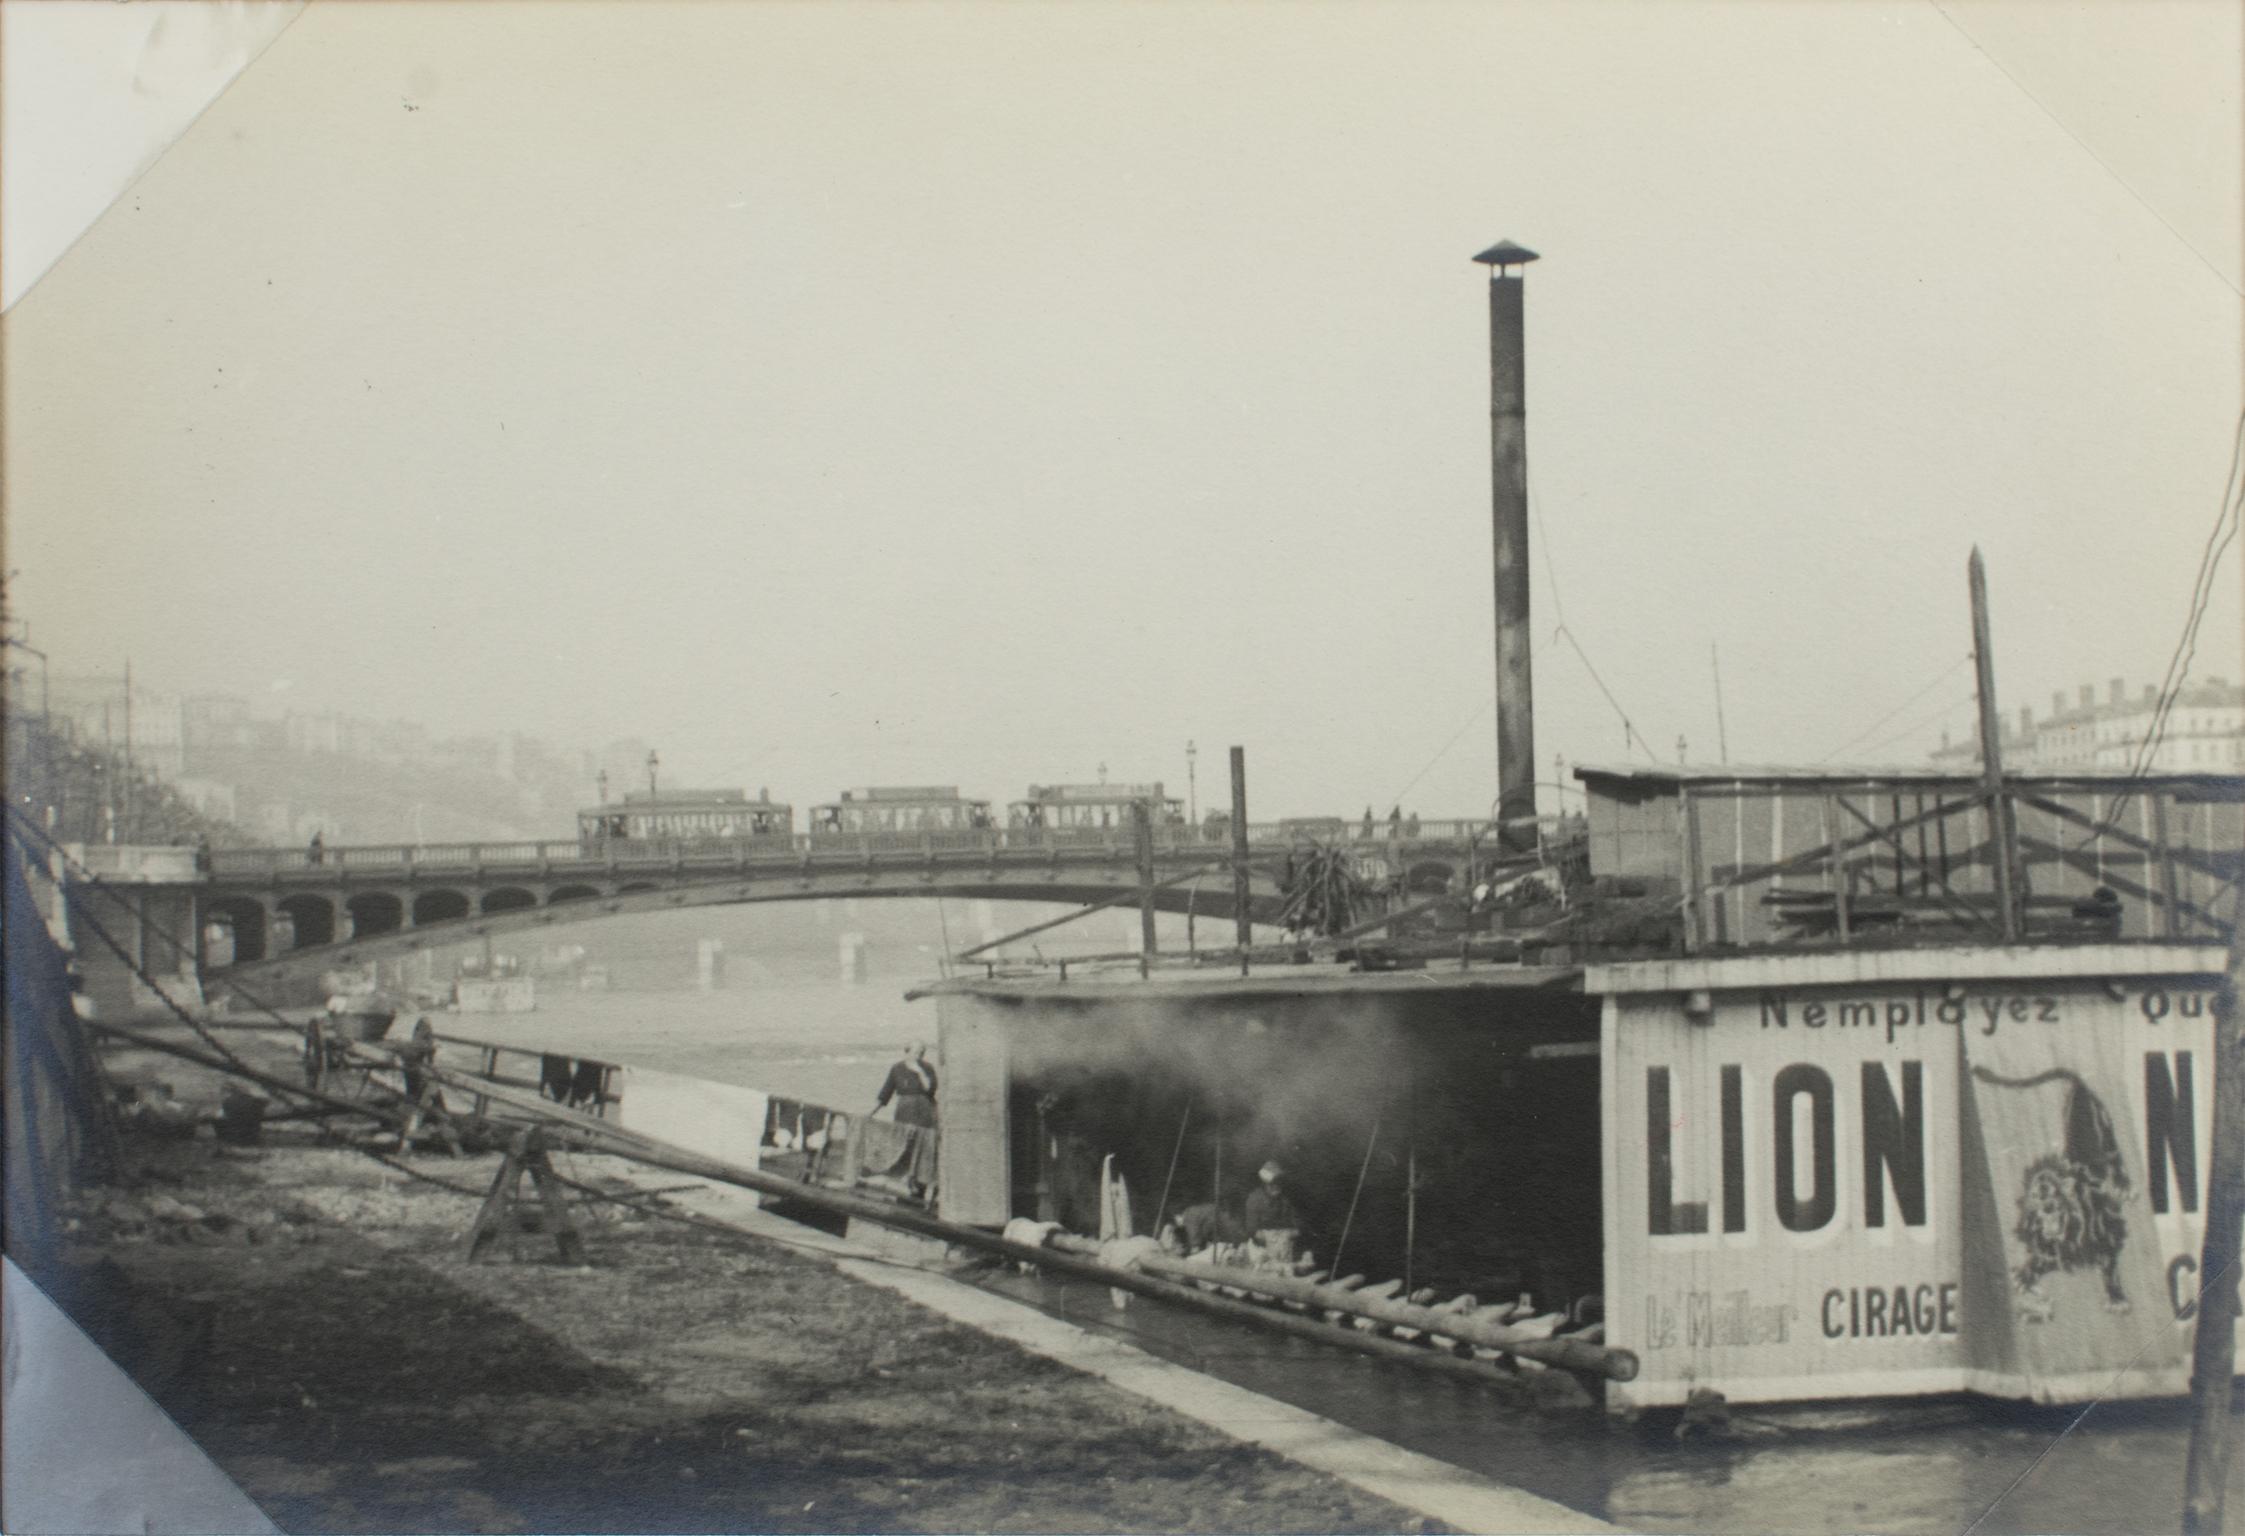 A unique original silver gelatin black and white photograph by French press Agency. View of the Rhone River in Lyon, France, March 1927. 
The view of the Rhone River was taken from the banks of the river in Lyon, dated March 26,